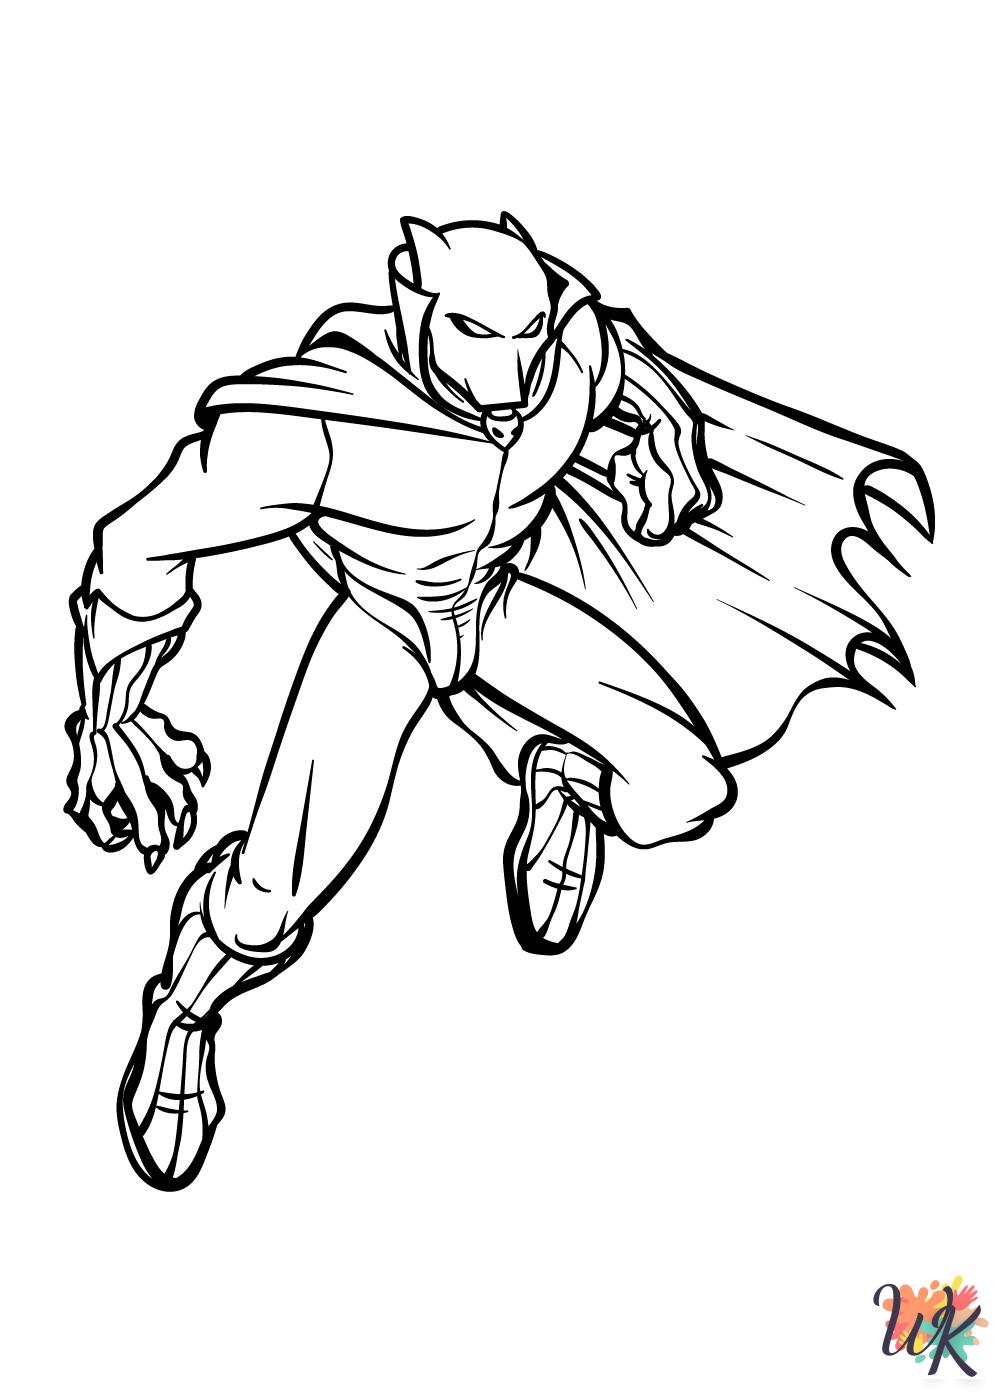 printable Superhero coloring pages for adults